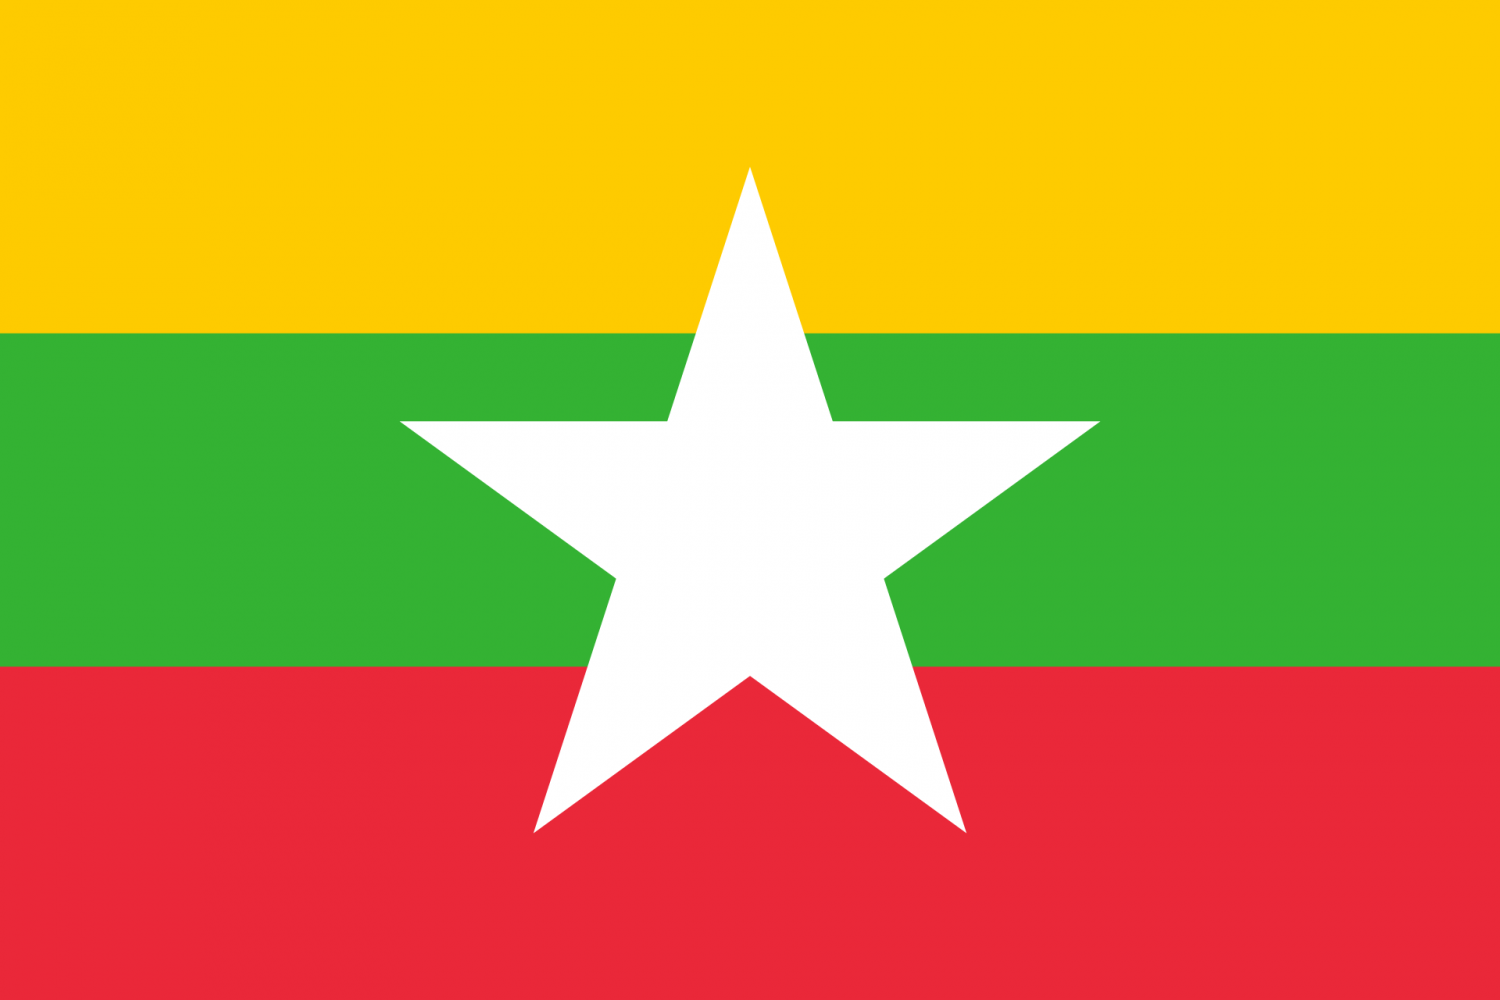 BREAKING NEWS: Coup d'état happening in Myanmar - Society, Environment